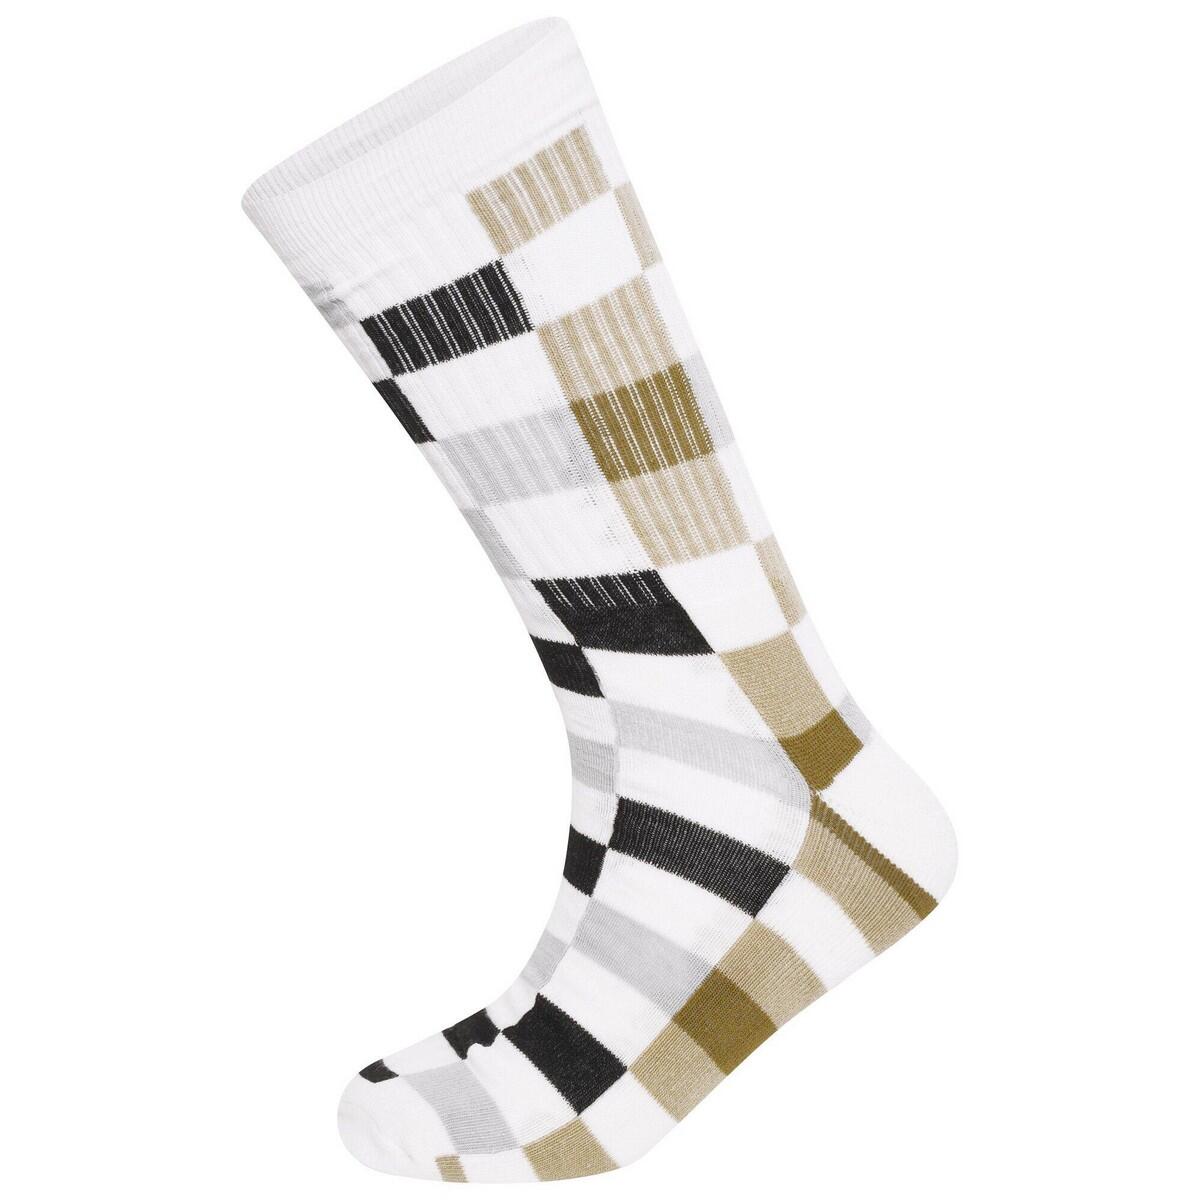 DARE 2B Unisex Adult Henry Holland Checkerboard Socks (Pack of 2) (White)